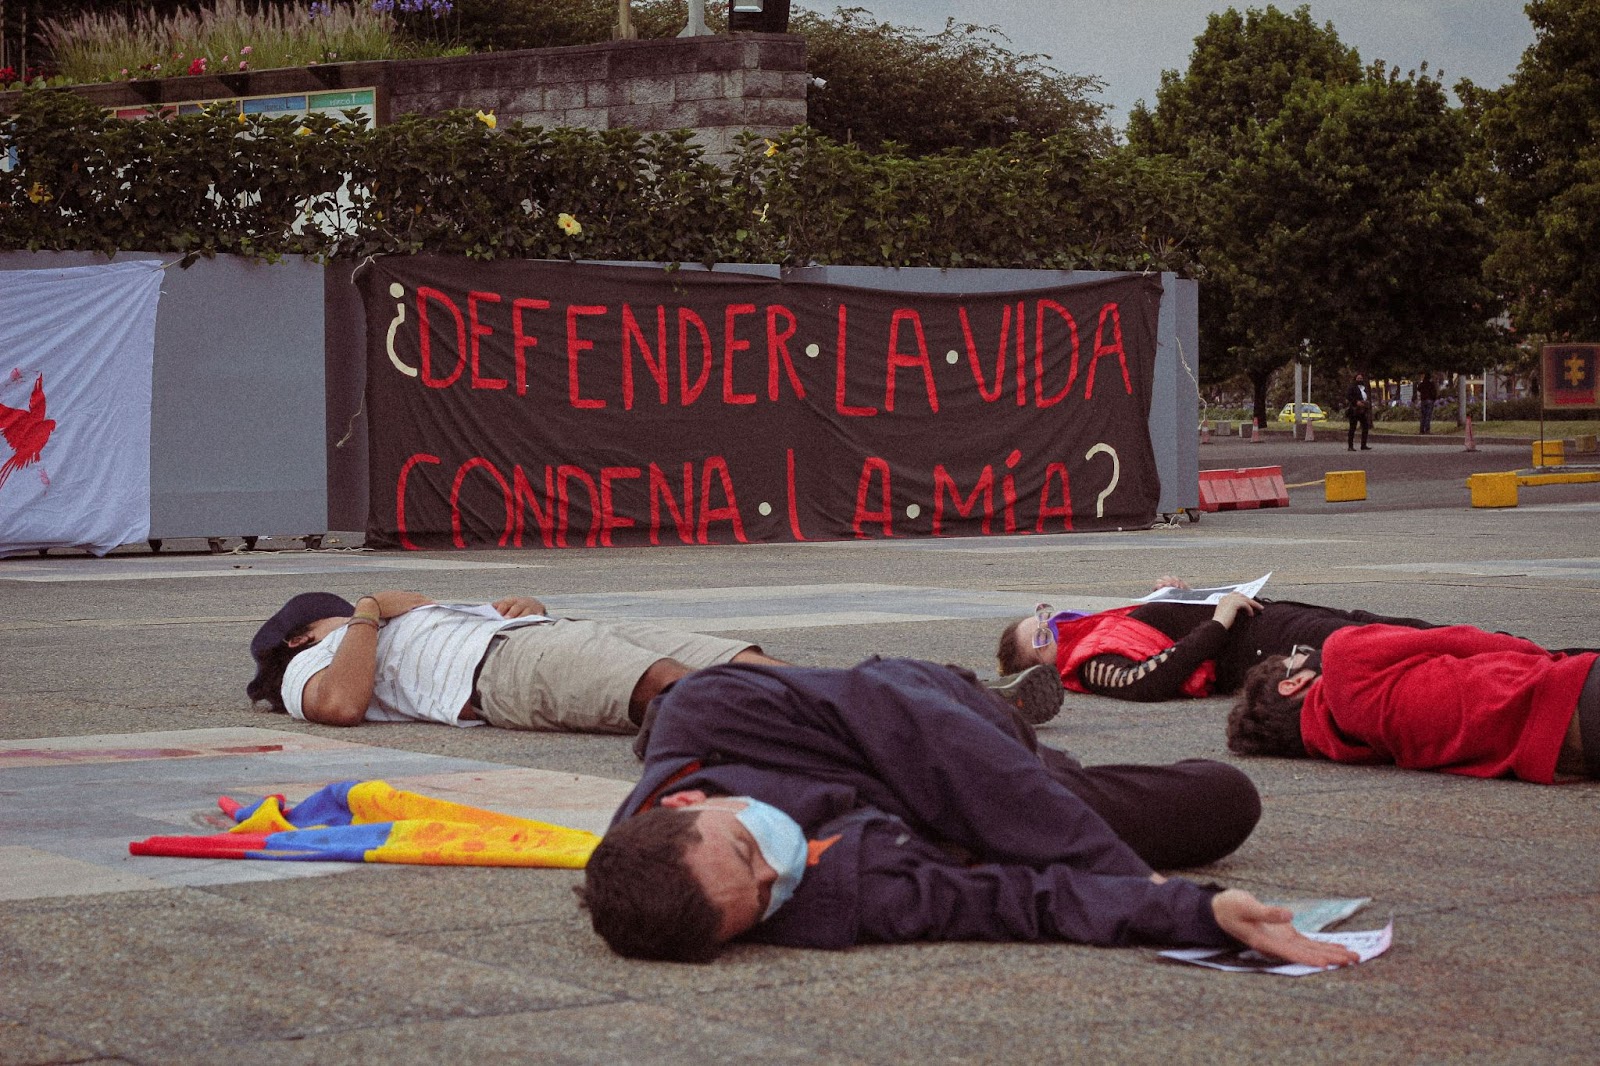 Rebels lie on the forecourt pretending to be dead beside a bloody Colombian flag.